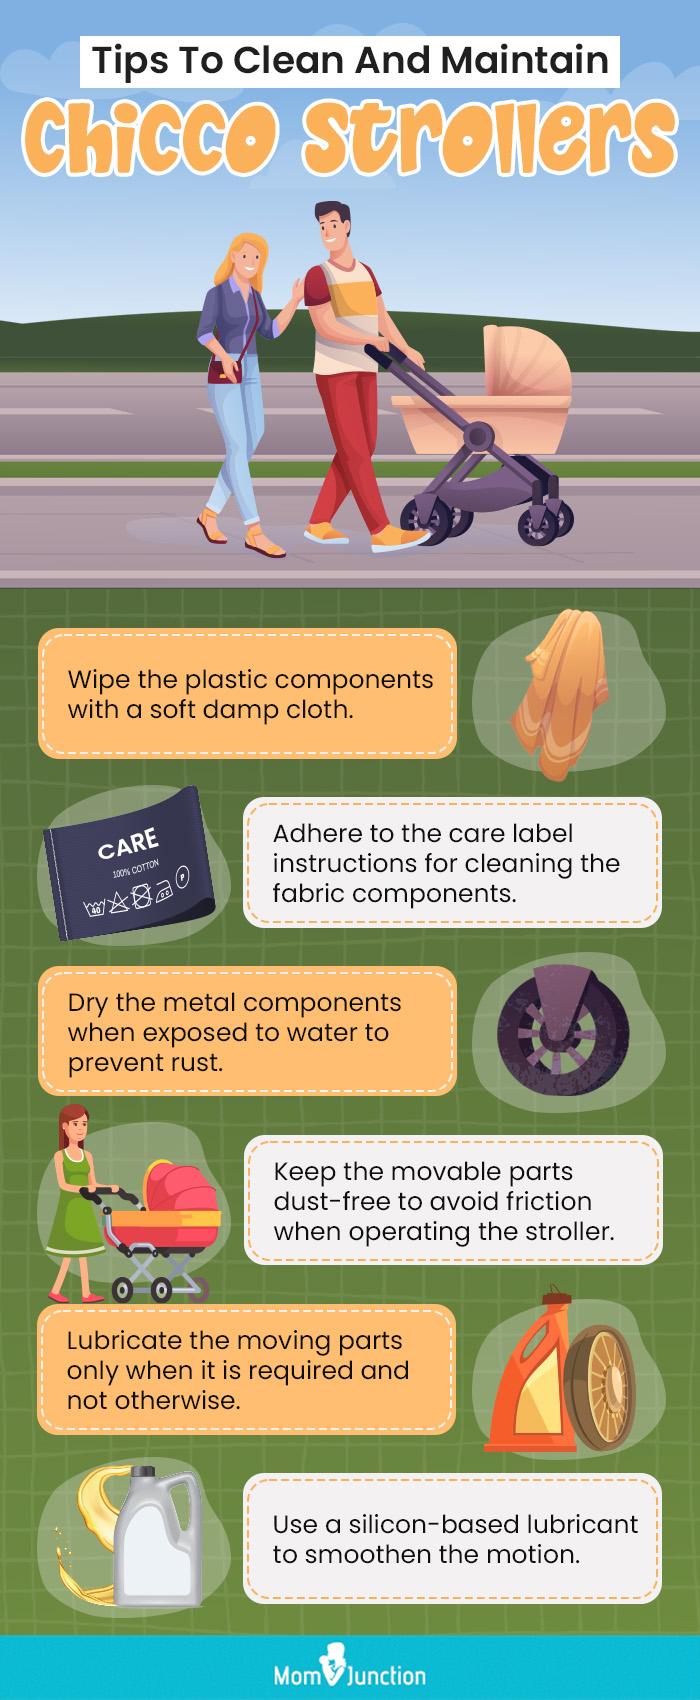 Tips To Clean And Maintain Chicco Strollers (infographic)